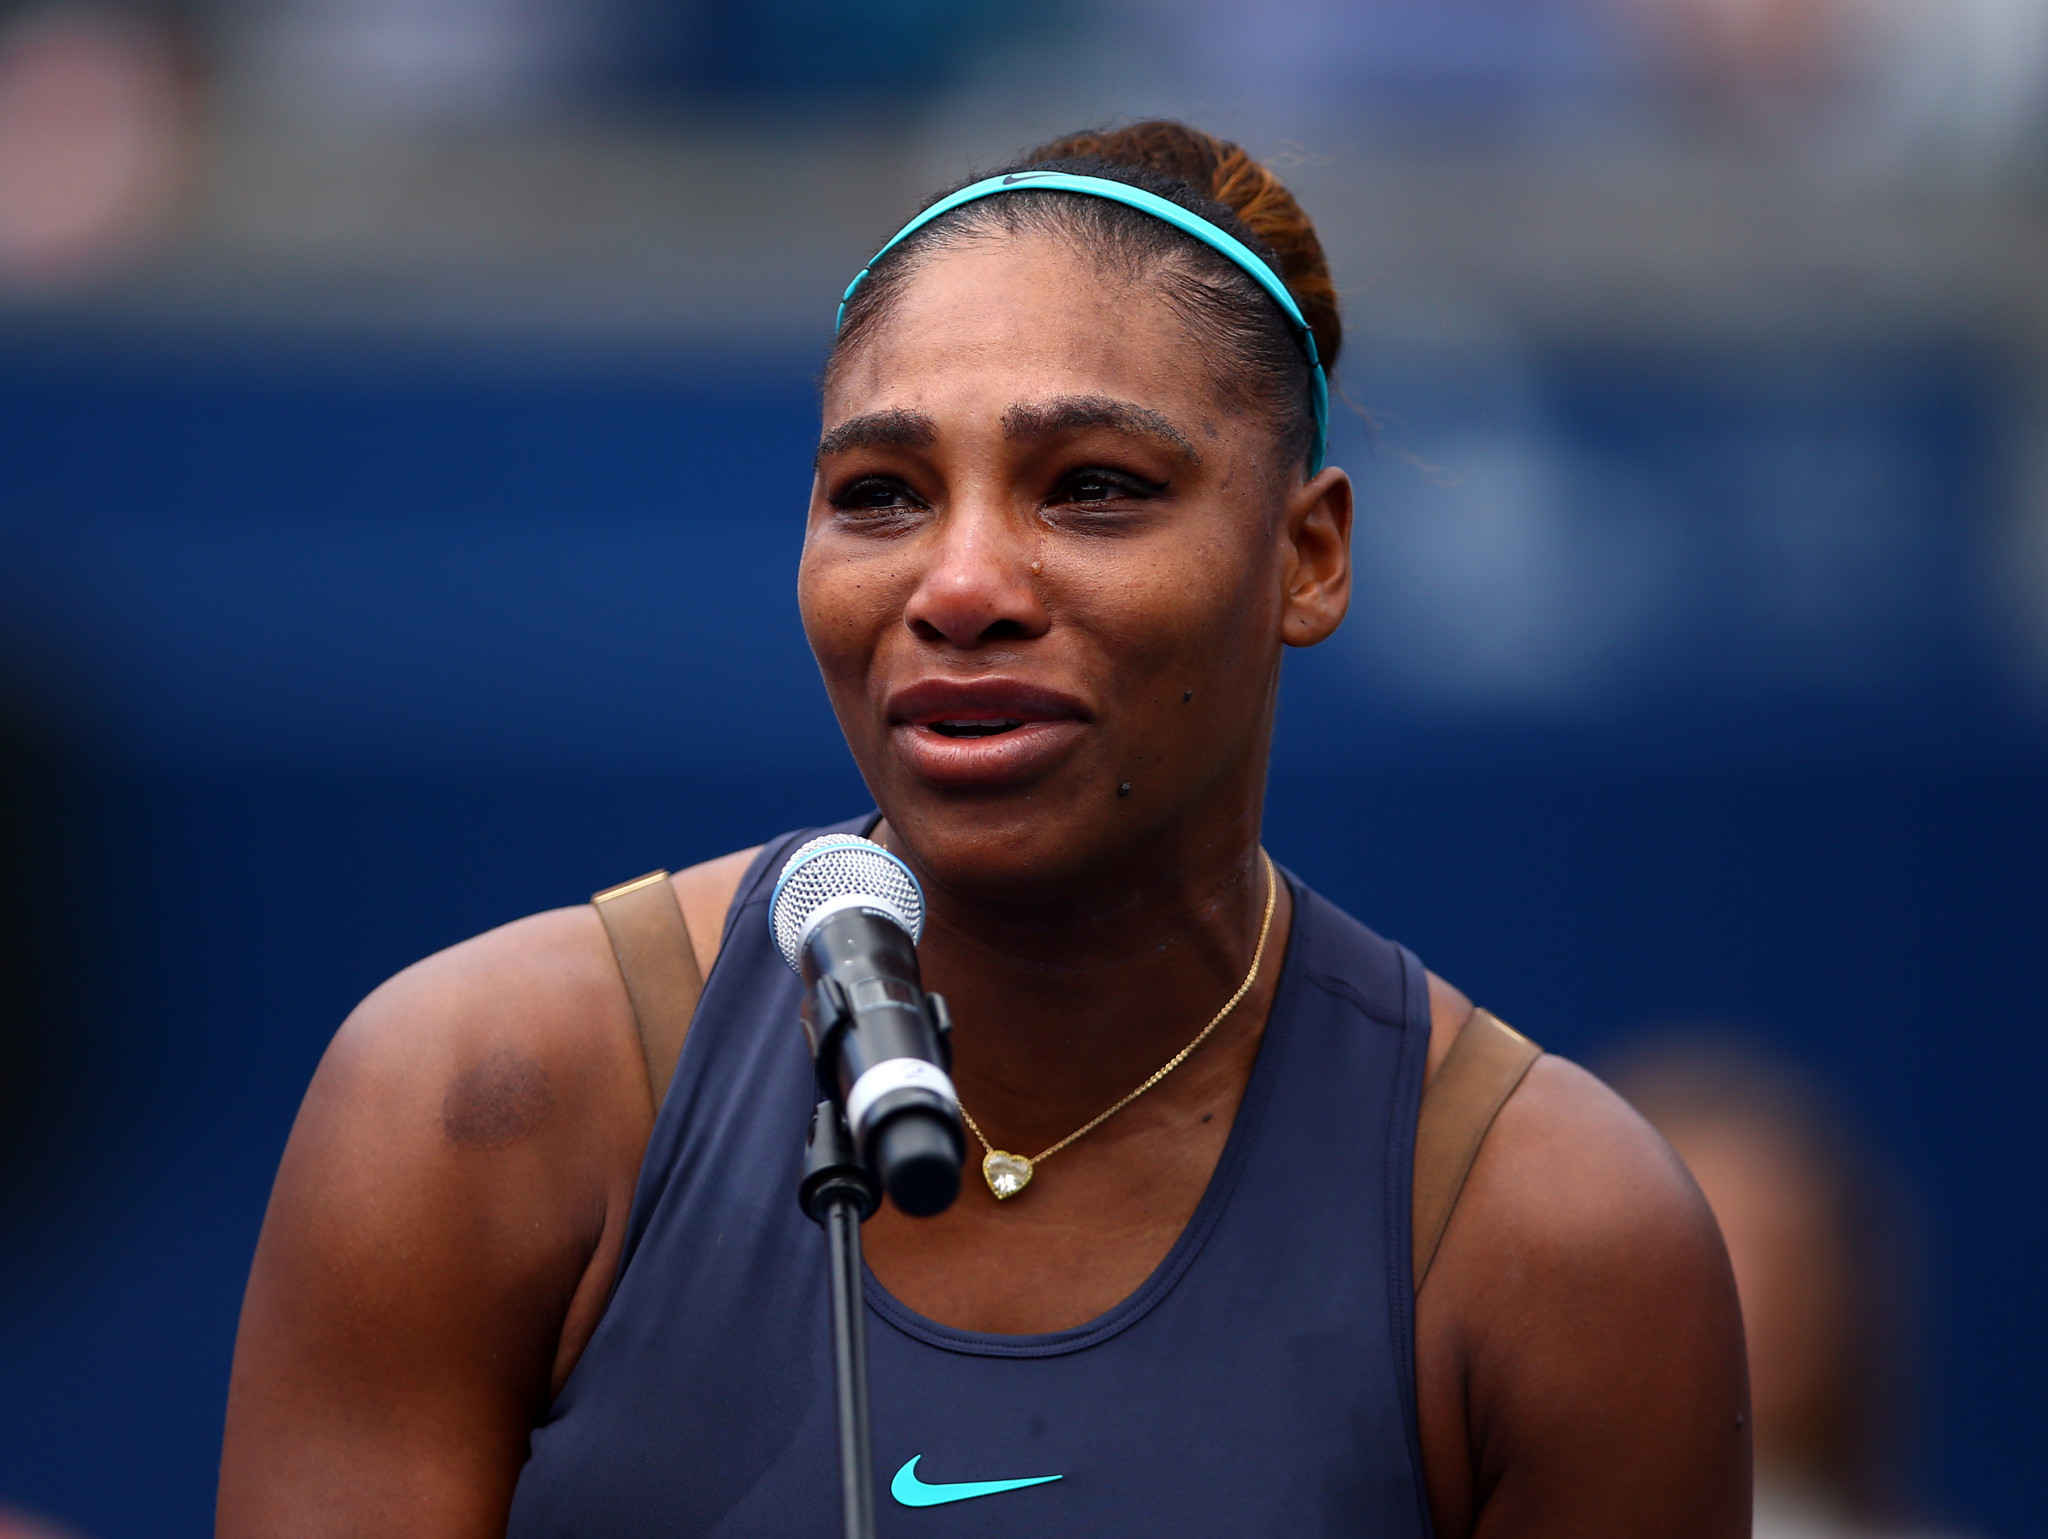 American Serena Williams withdrew from the Cincinnati Masters with a back injury ©Getty Images